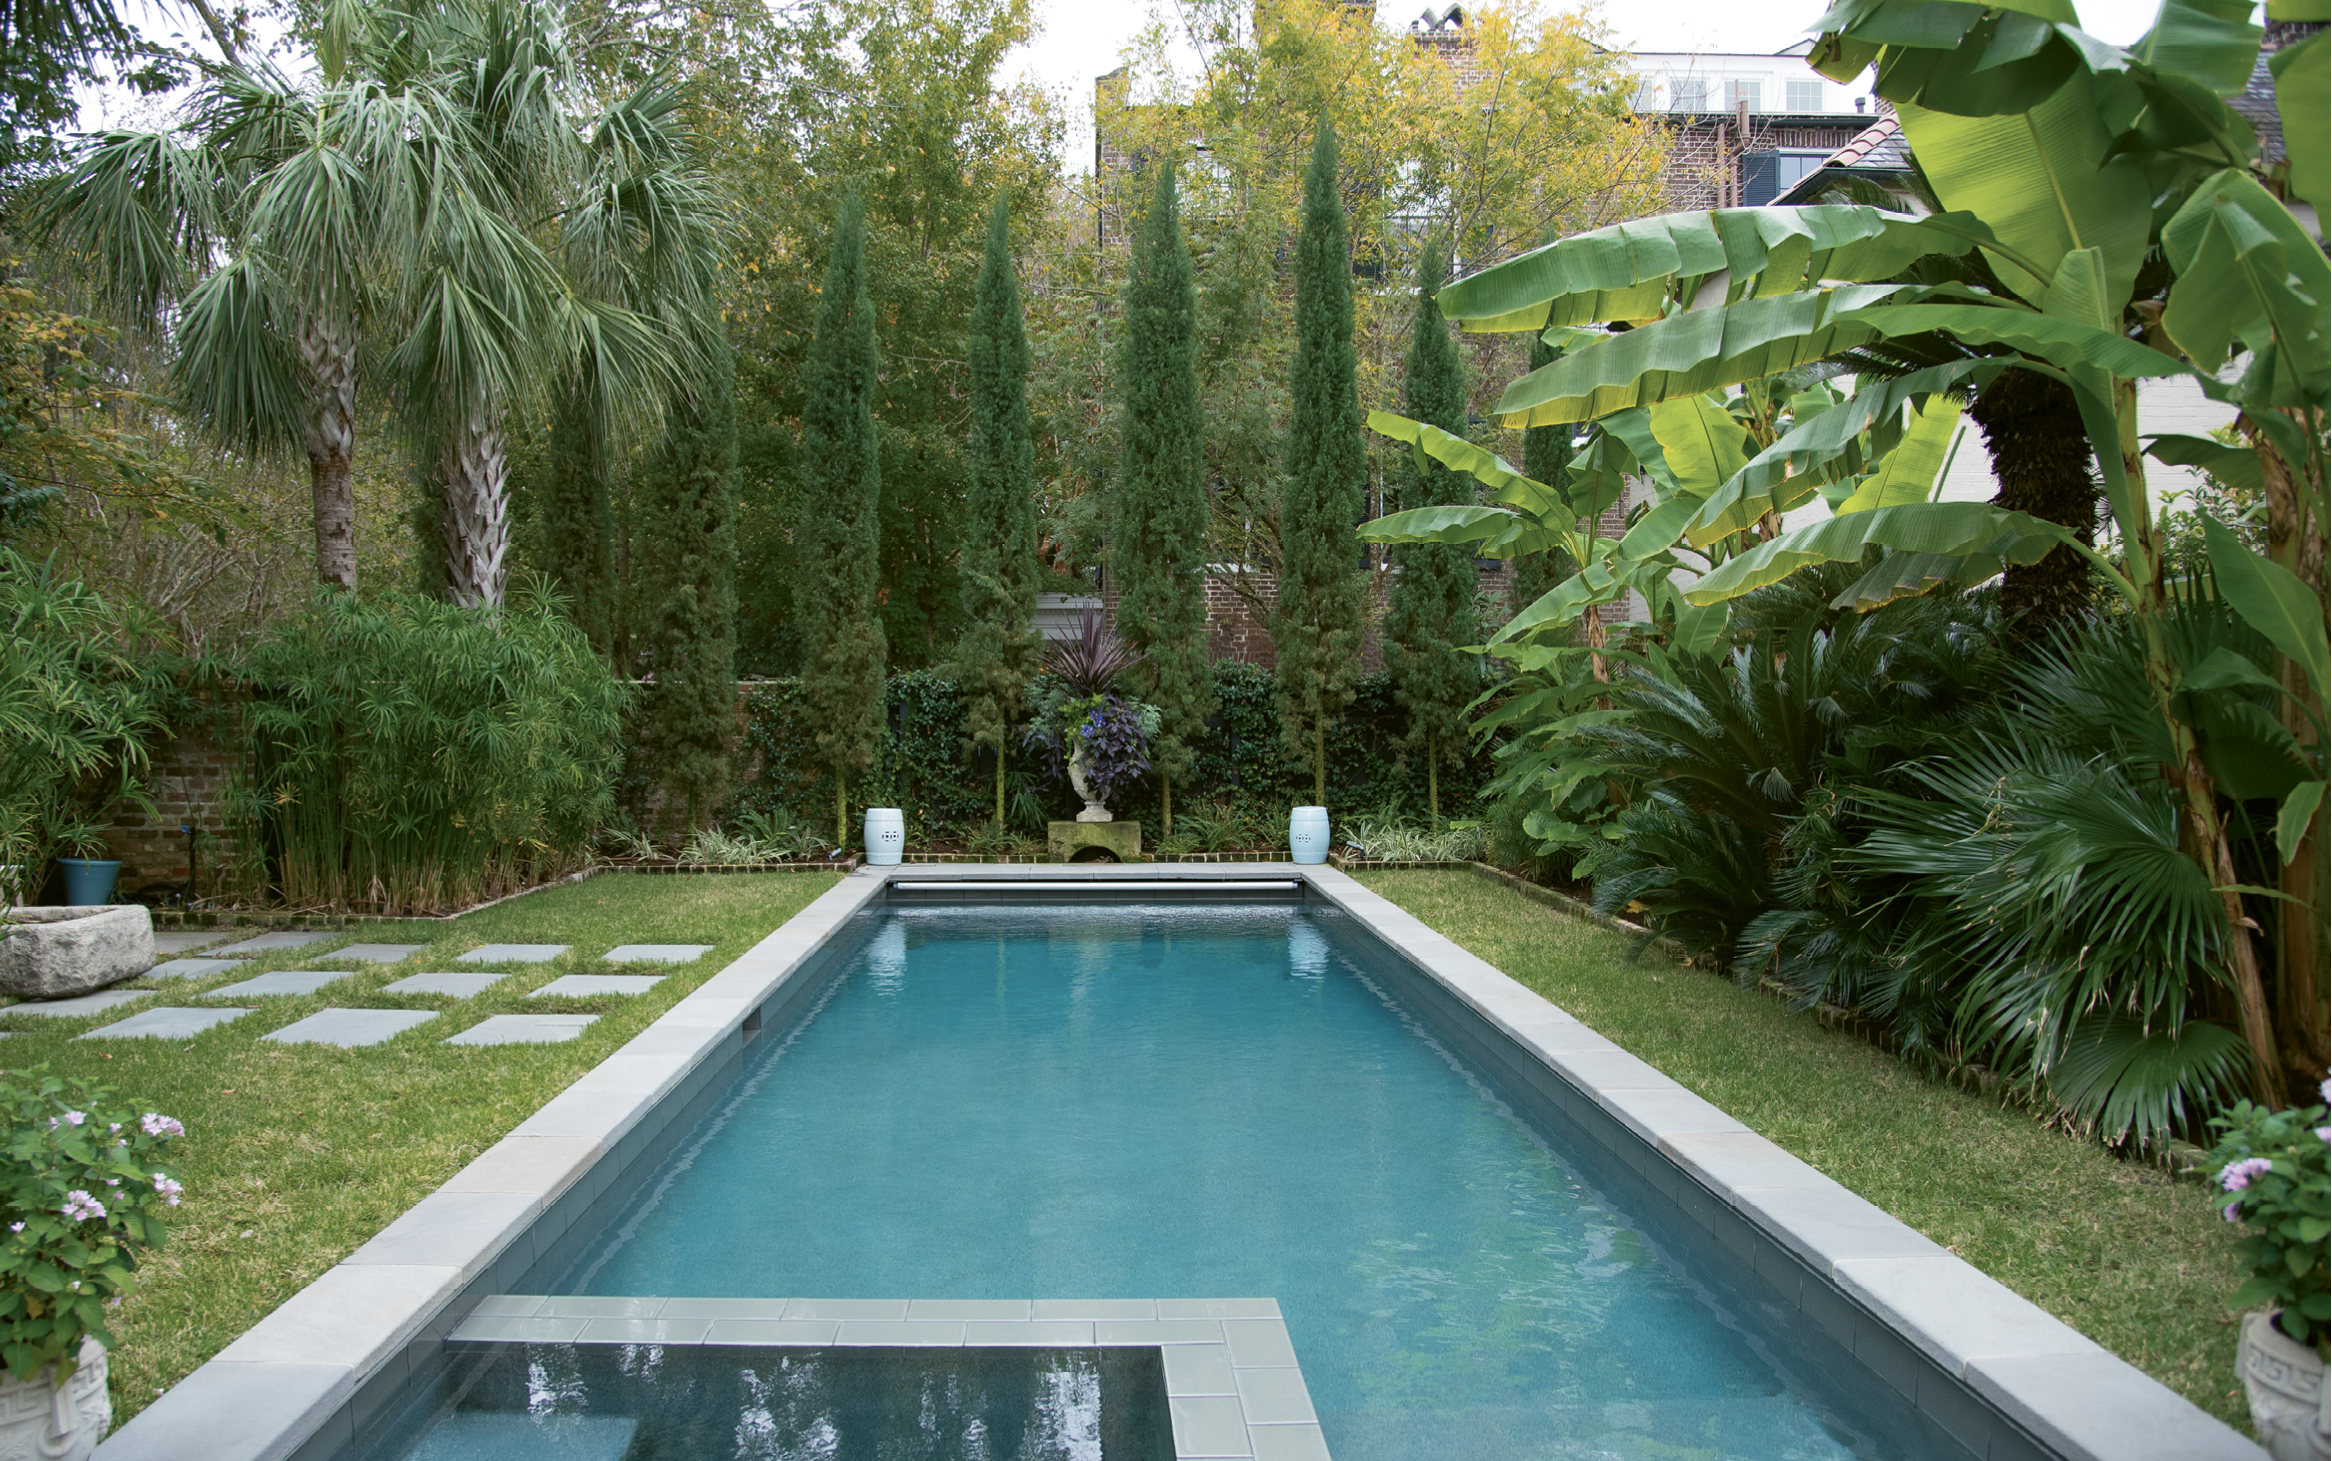 Calm &amp; Cool: The garden’s final room conjures the Mediterranean with an all-green landscape that mingles Italian cypress trees, Confederate jasmine, variegated flax lily, sago palms, and banana trees.